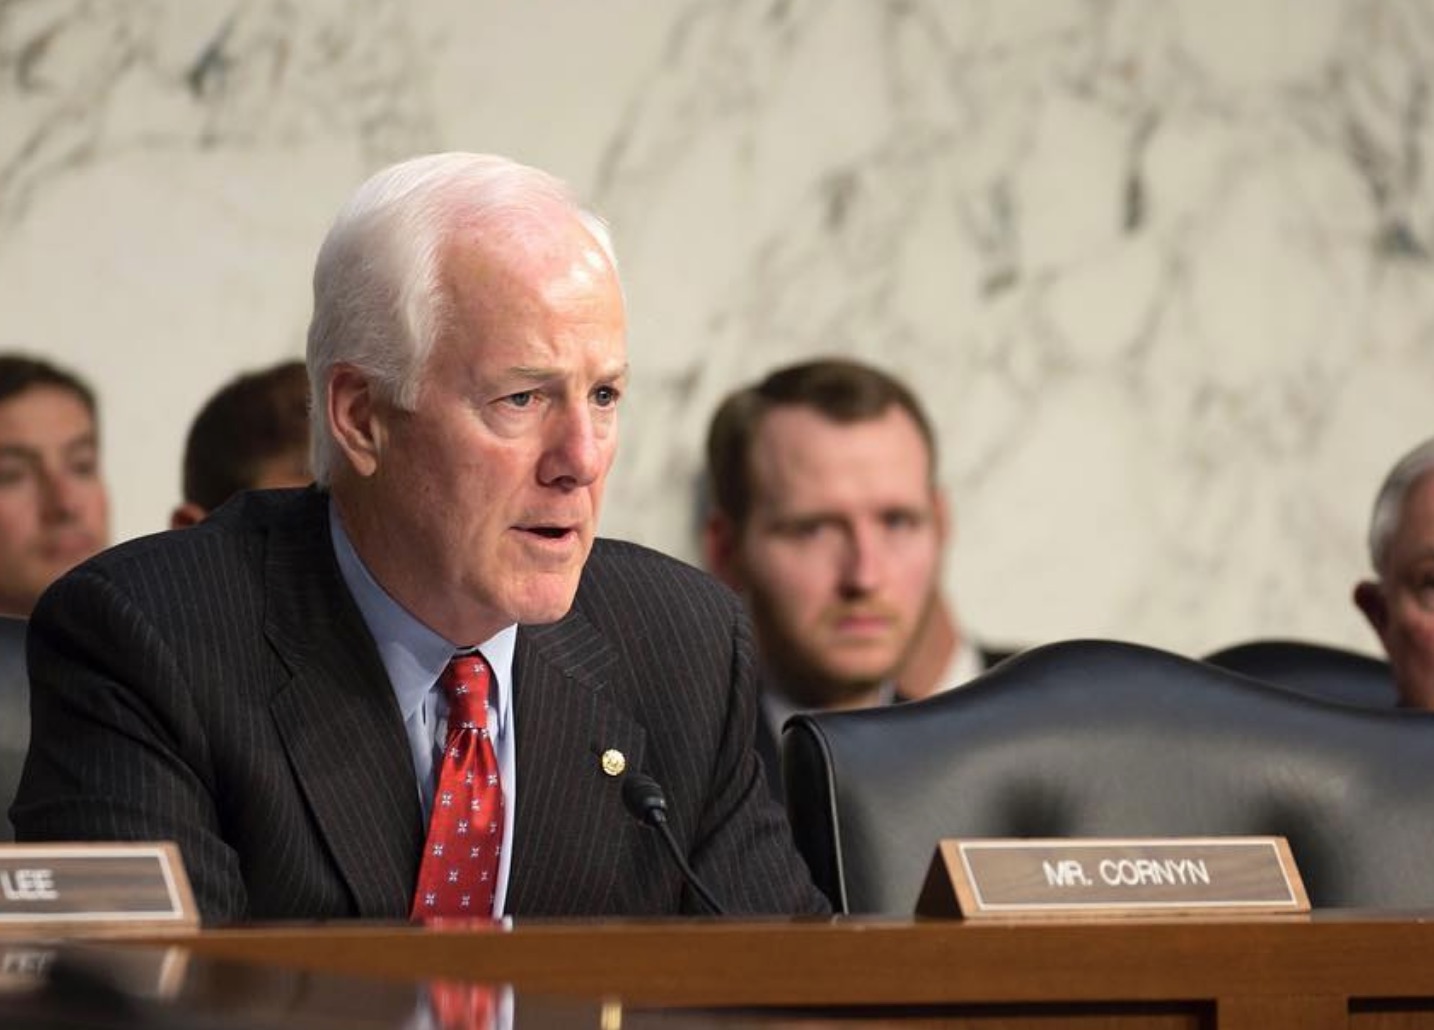 Cornyn Calls for Schools to Reopen